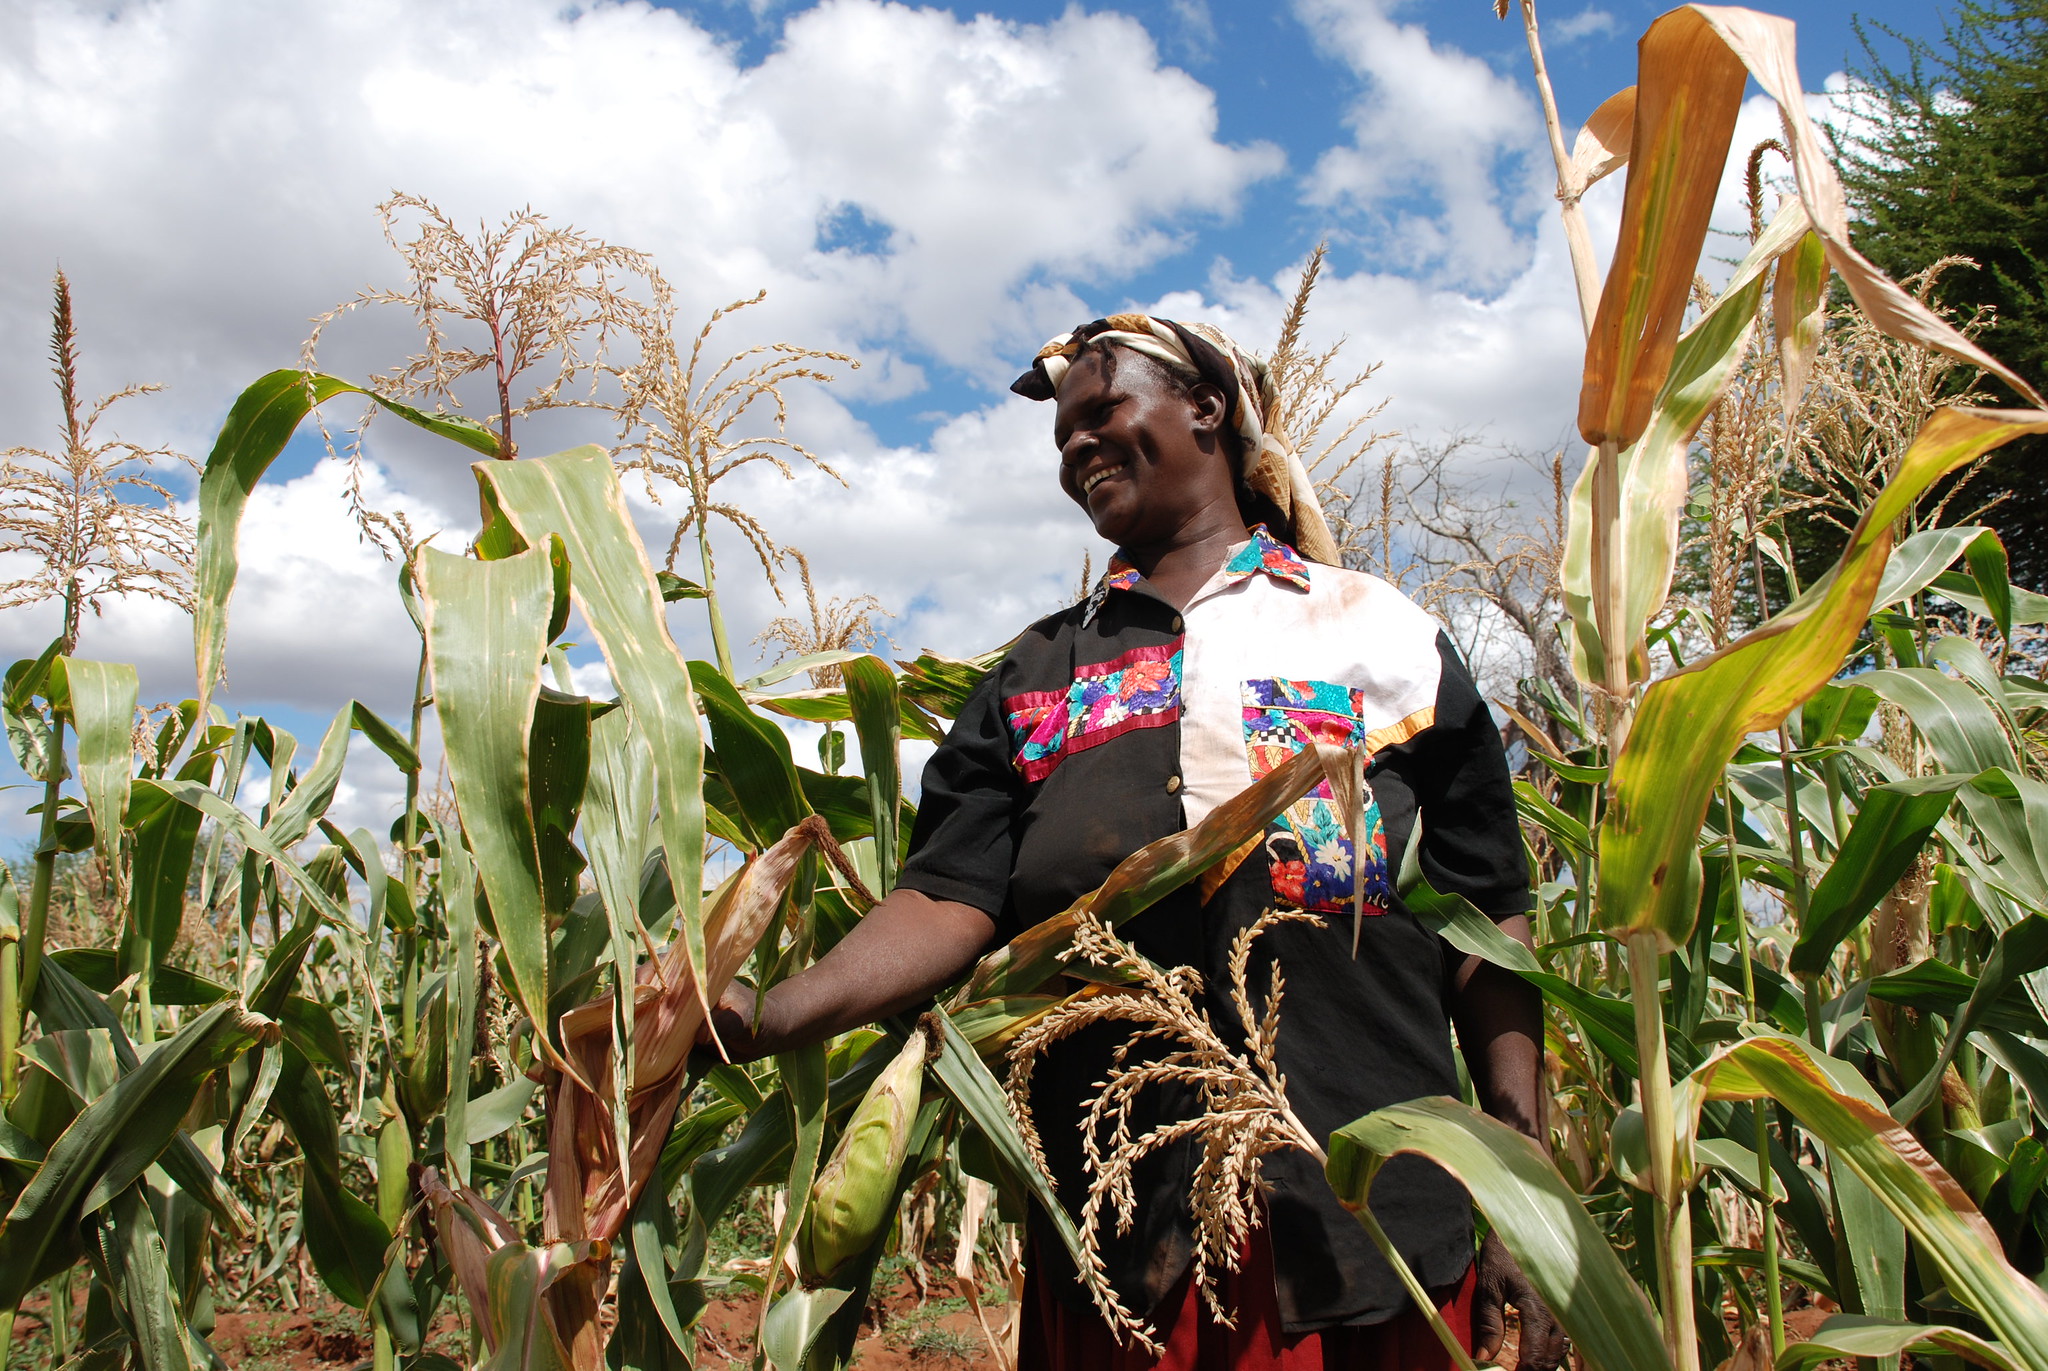 Drought tolerant maize route out of poverty for community-based seed producer, Kenya. (Photo: Anne Wangalachi/CIMMYT)